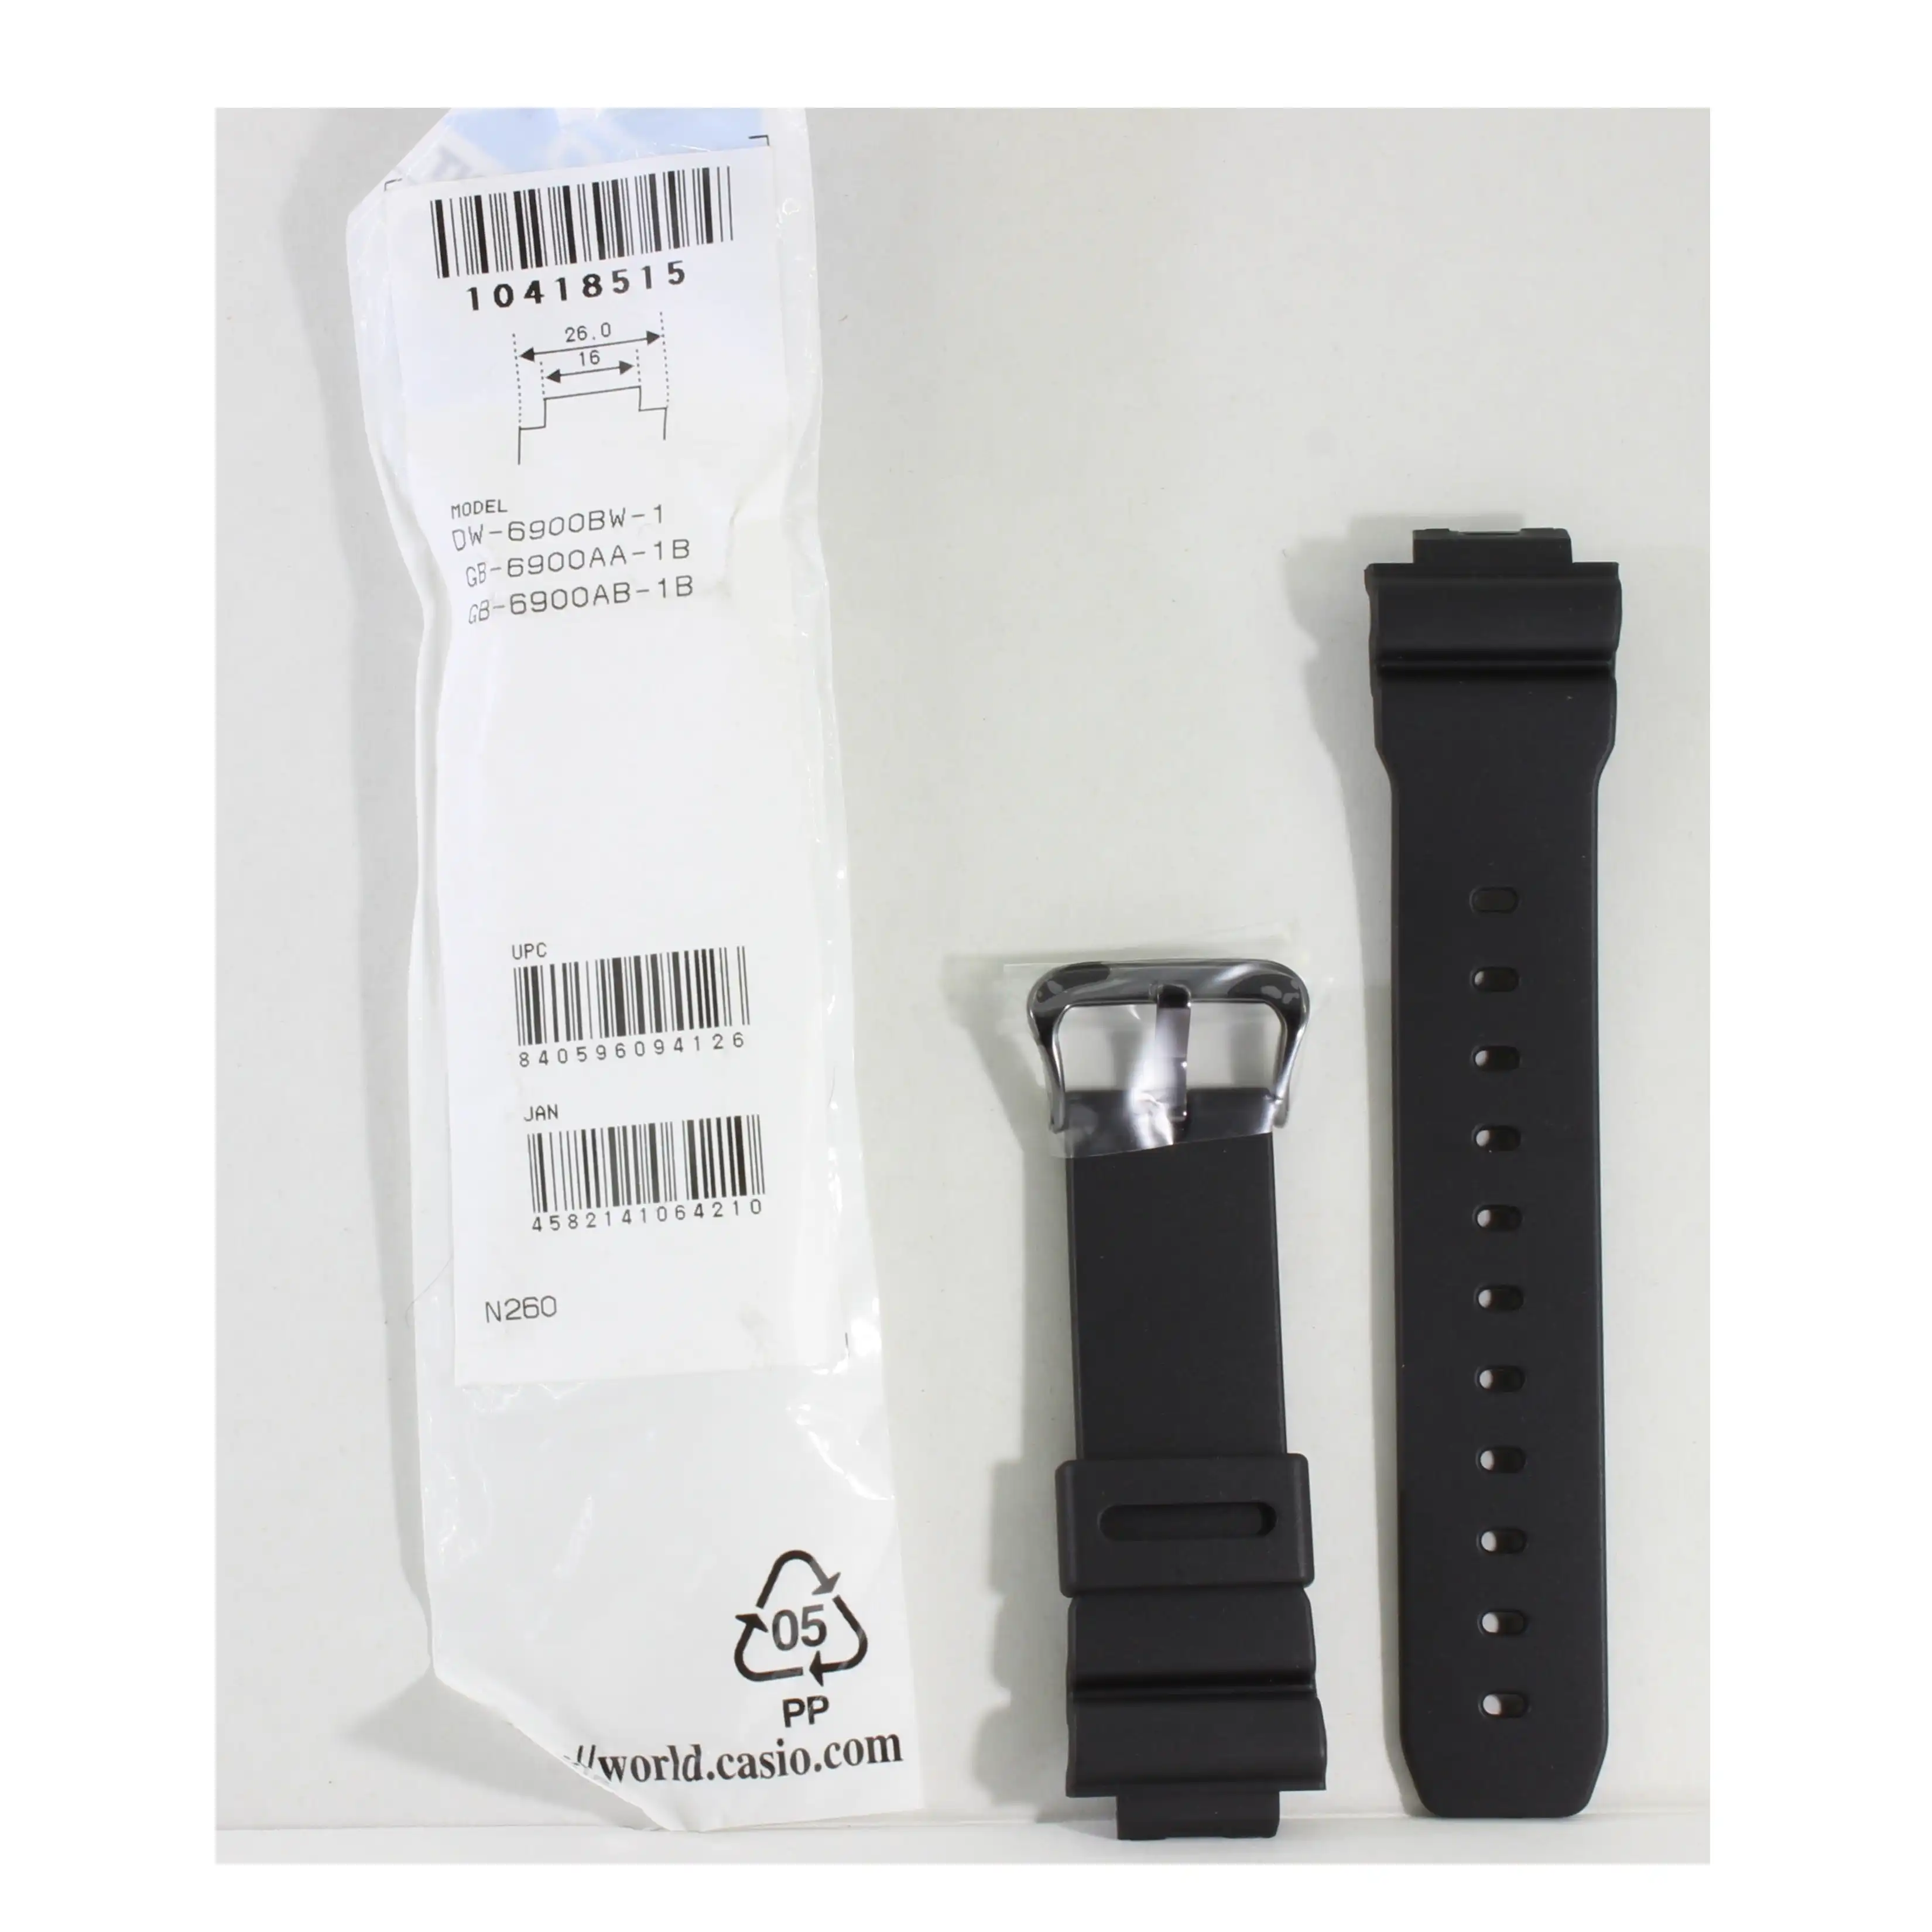 Casio G-Shock Matte Black Genuine Replacement Strap 10418515 to suit DW-6900BW-1